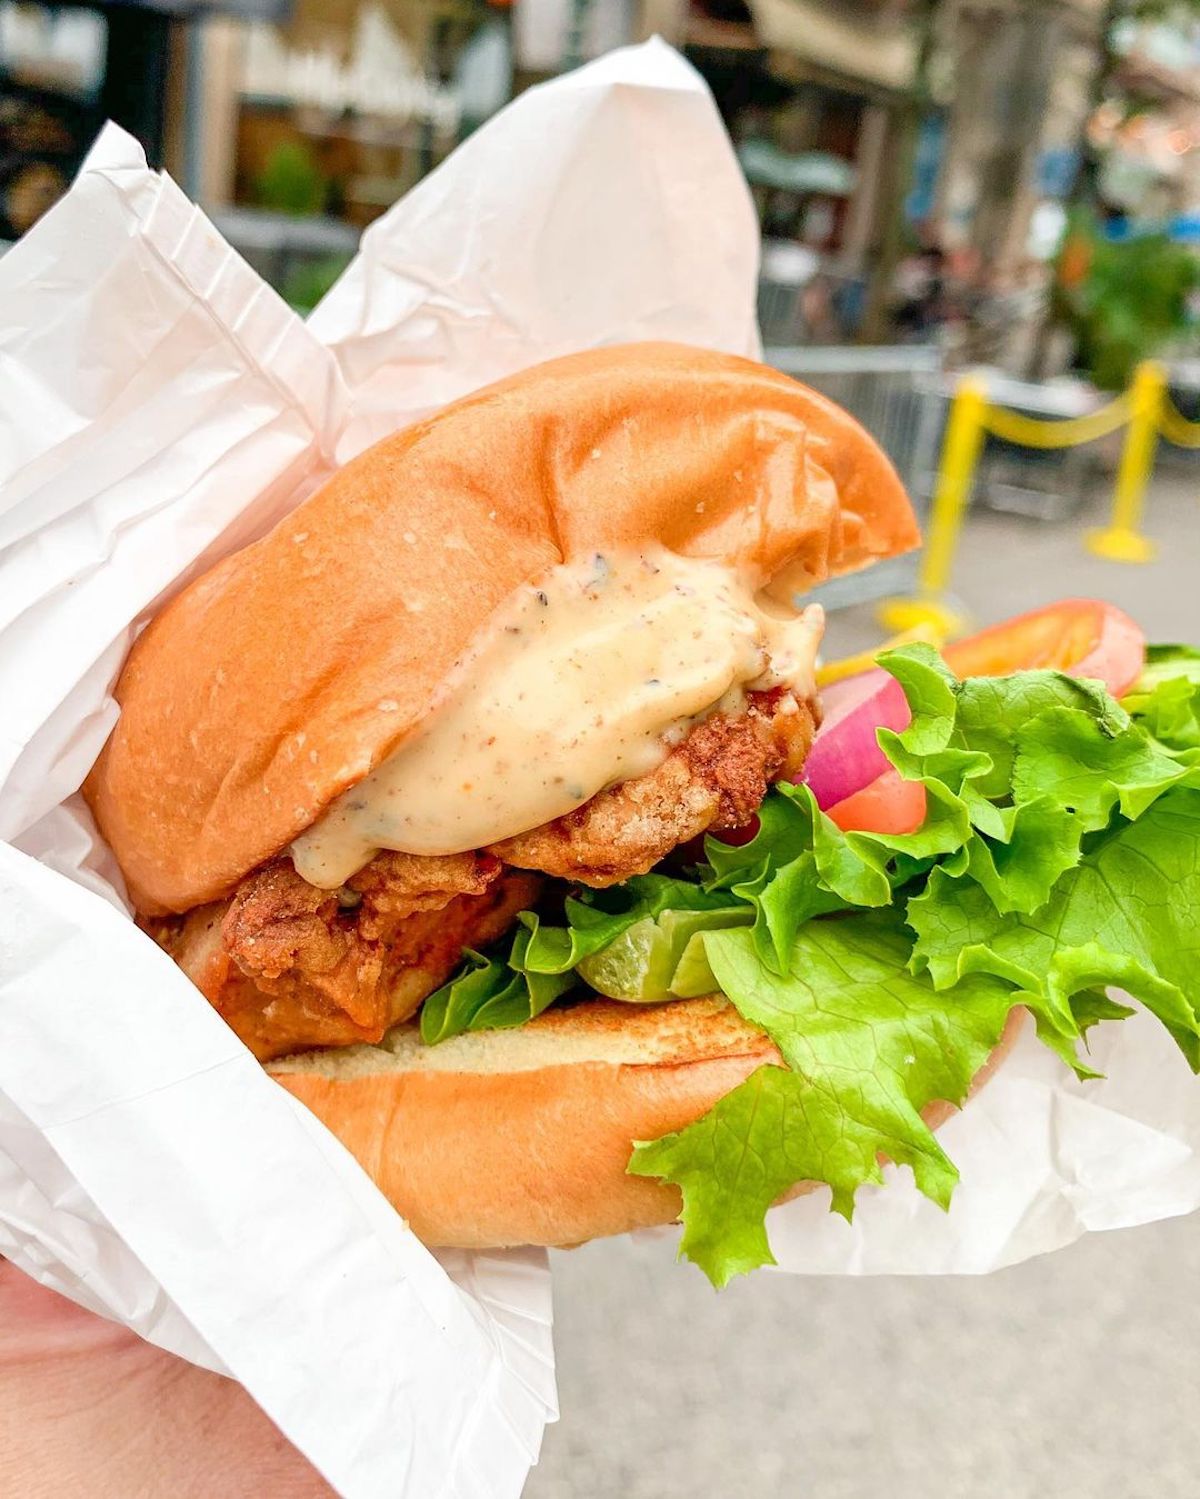 HipCityVeg to Sling Burgers in Union Square